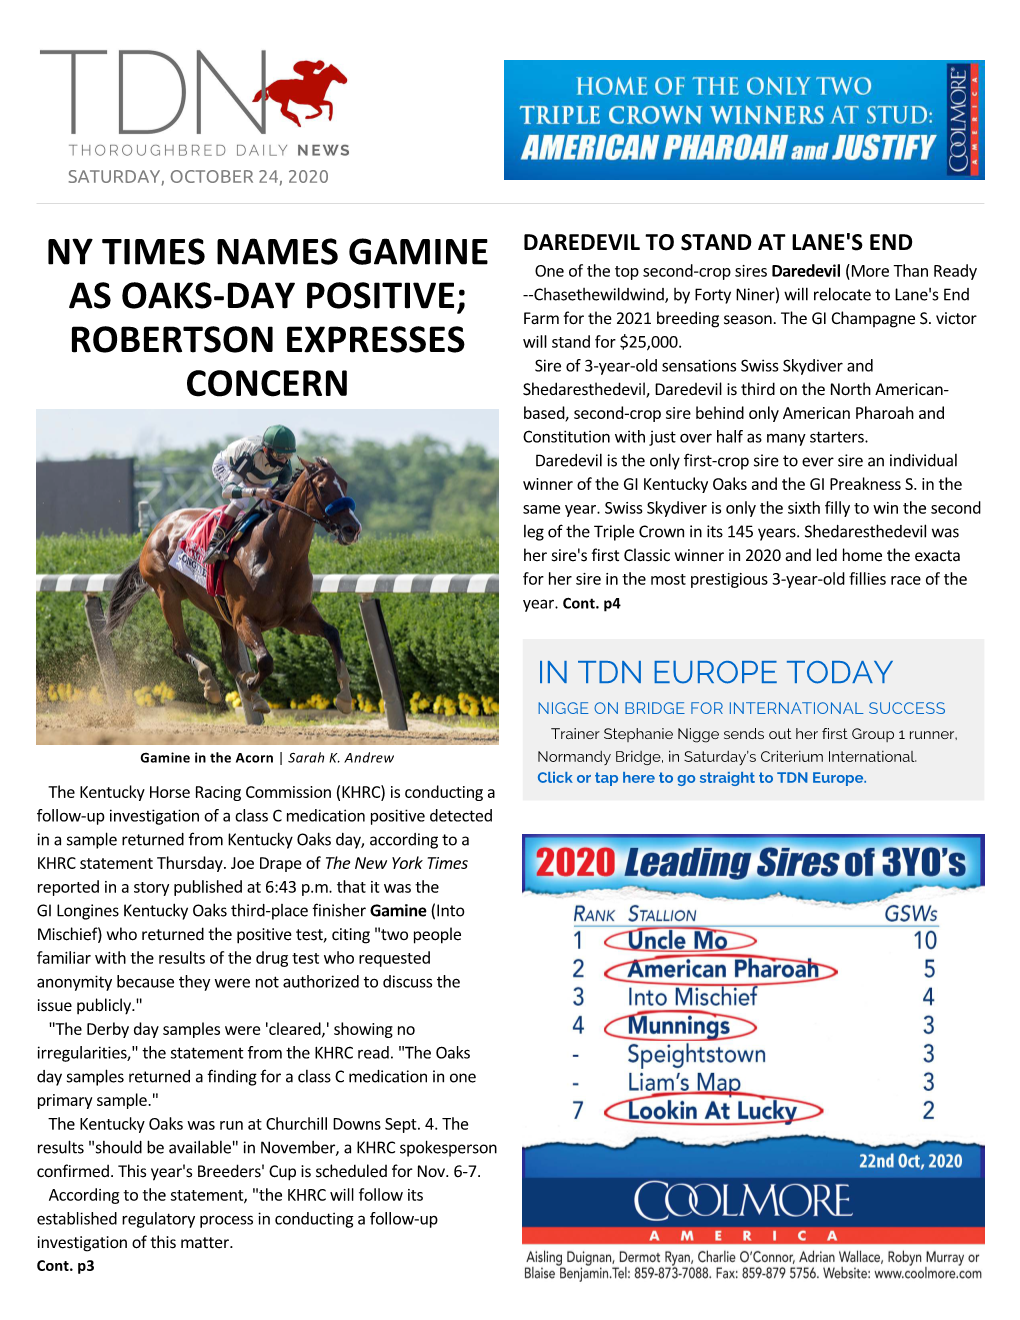 Ny Times Names Gamine As Oaks-Day Positive; Robertson Expresses Concern